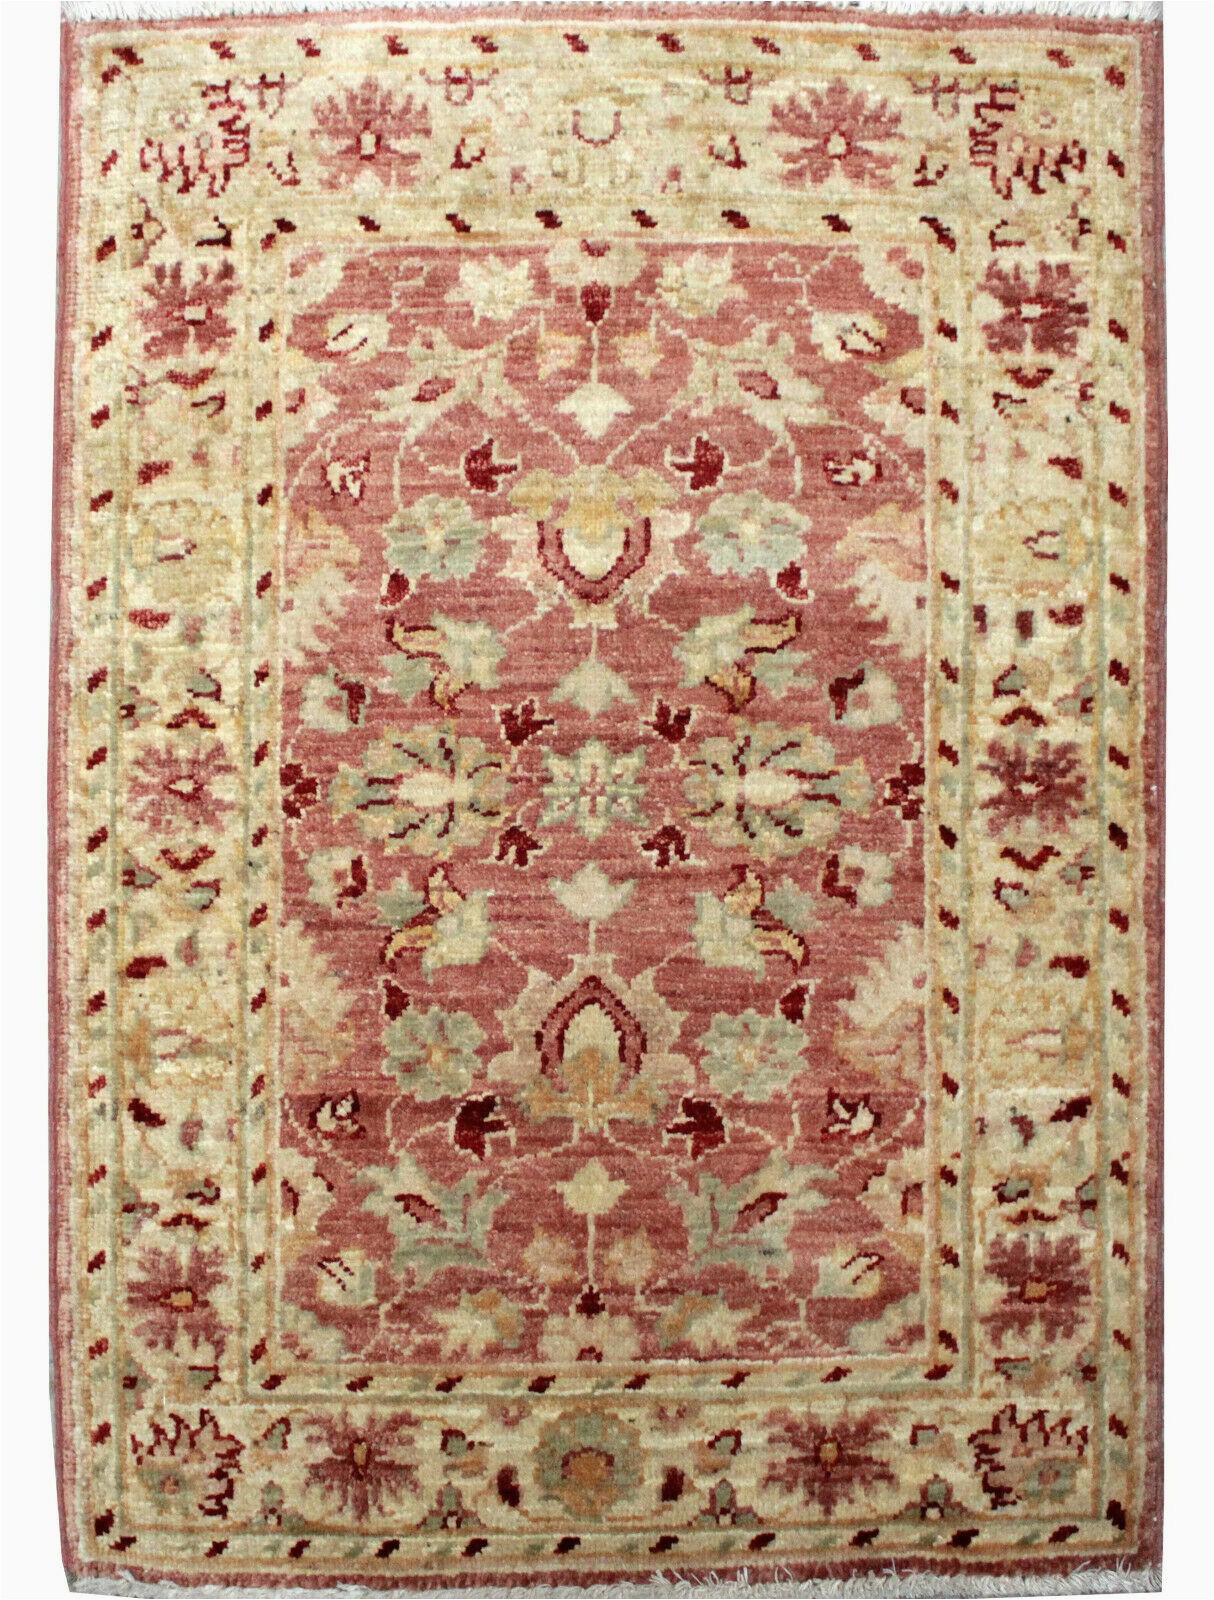 Area Rugs for Sale On Ebay Traditional Hand Knotted Chobi area Rug Rust Gold Color Modern Rug Size 2 X 3